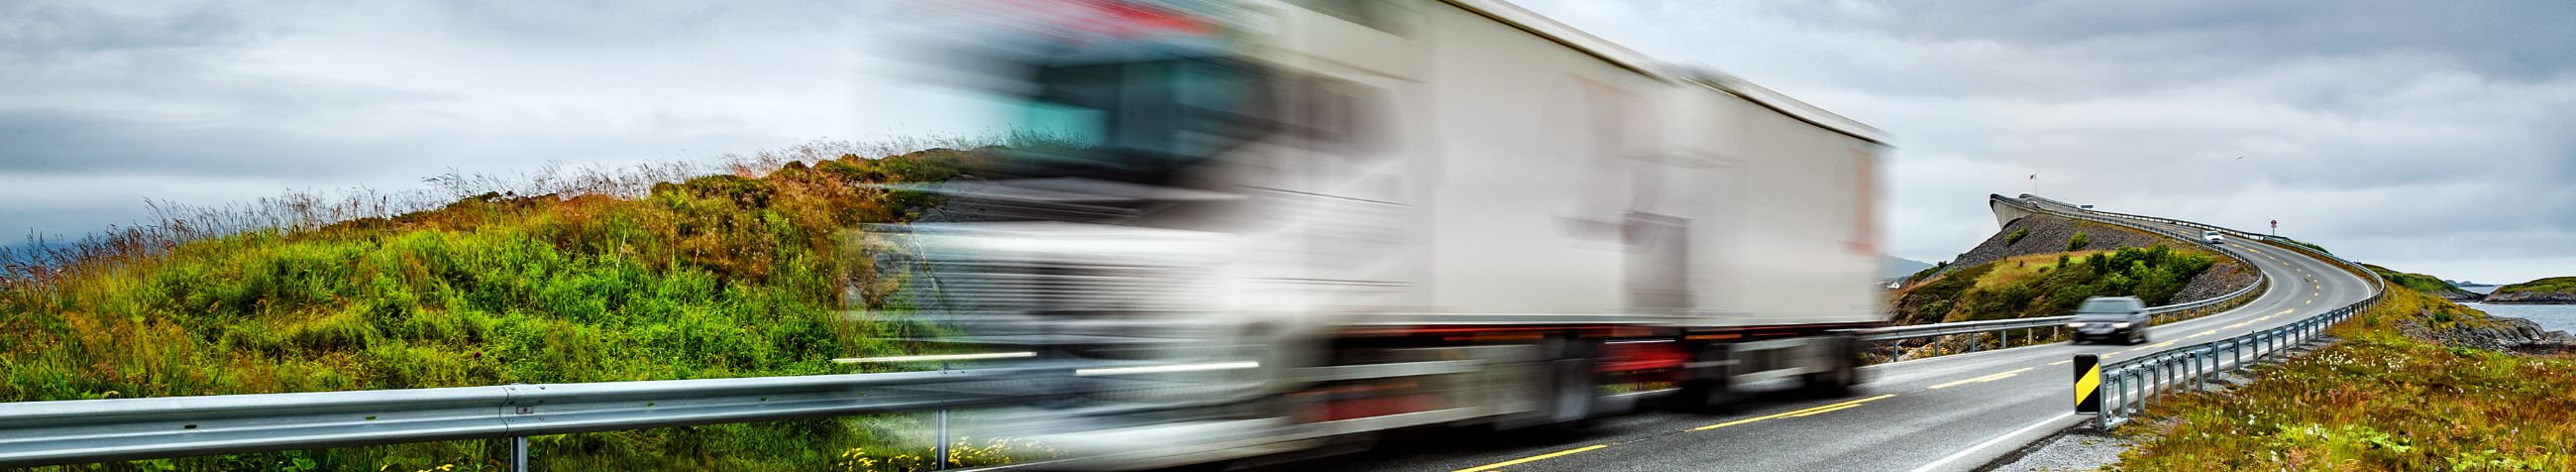 We offer full-spectrum international freight transport services, including the sale of used lorry parts and towage across Estonia and beyond.